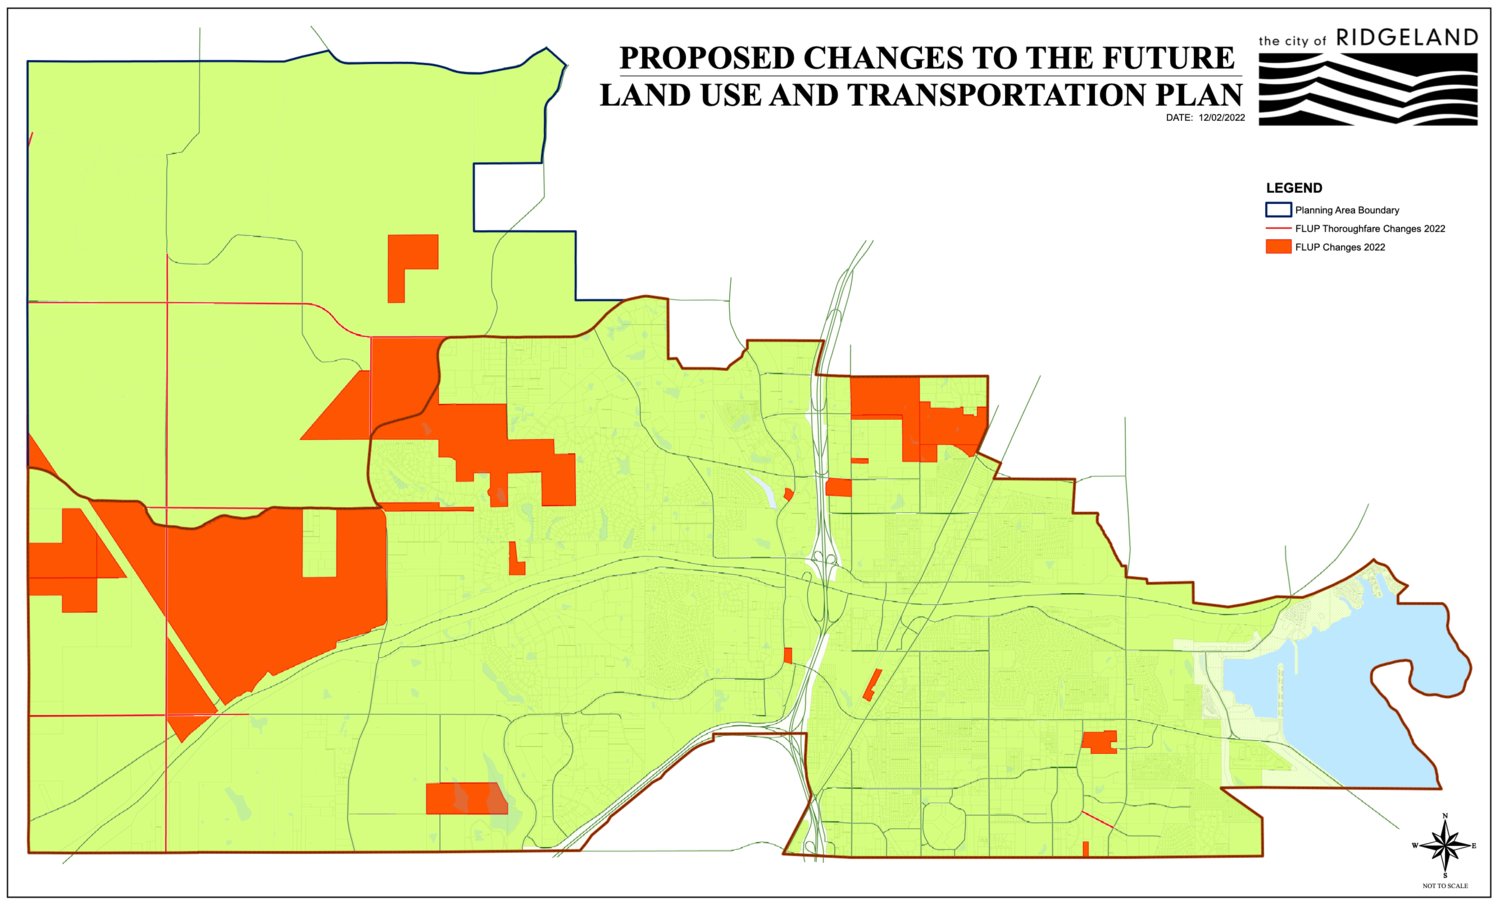 Areas with changes to Ridgeland’s Future Land Use and Transportation Plan are highlighted in orange.